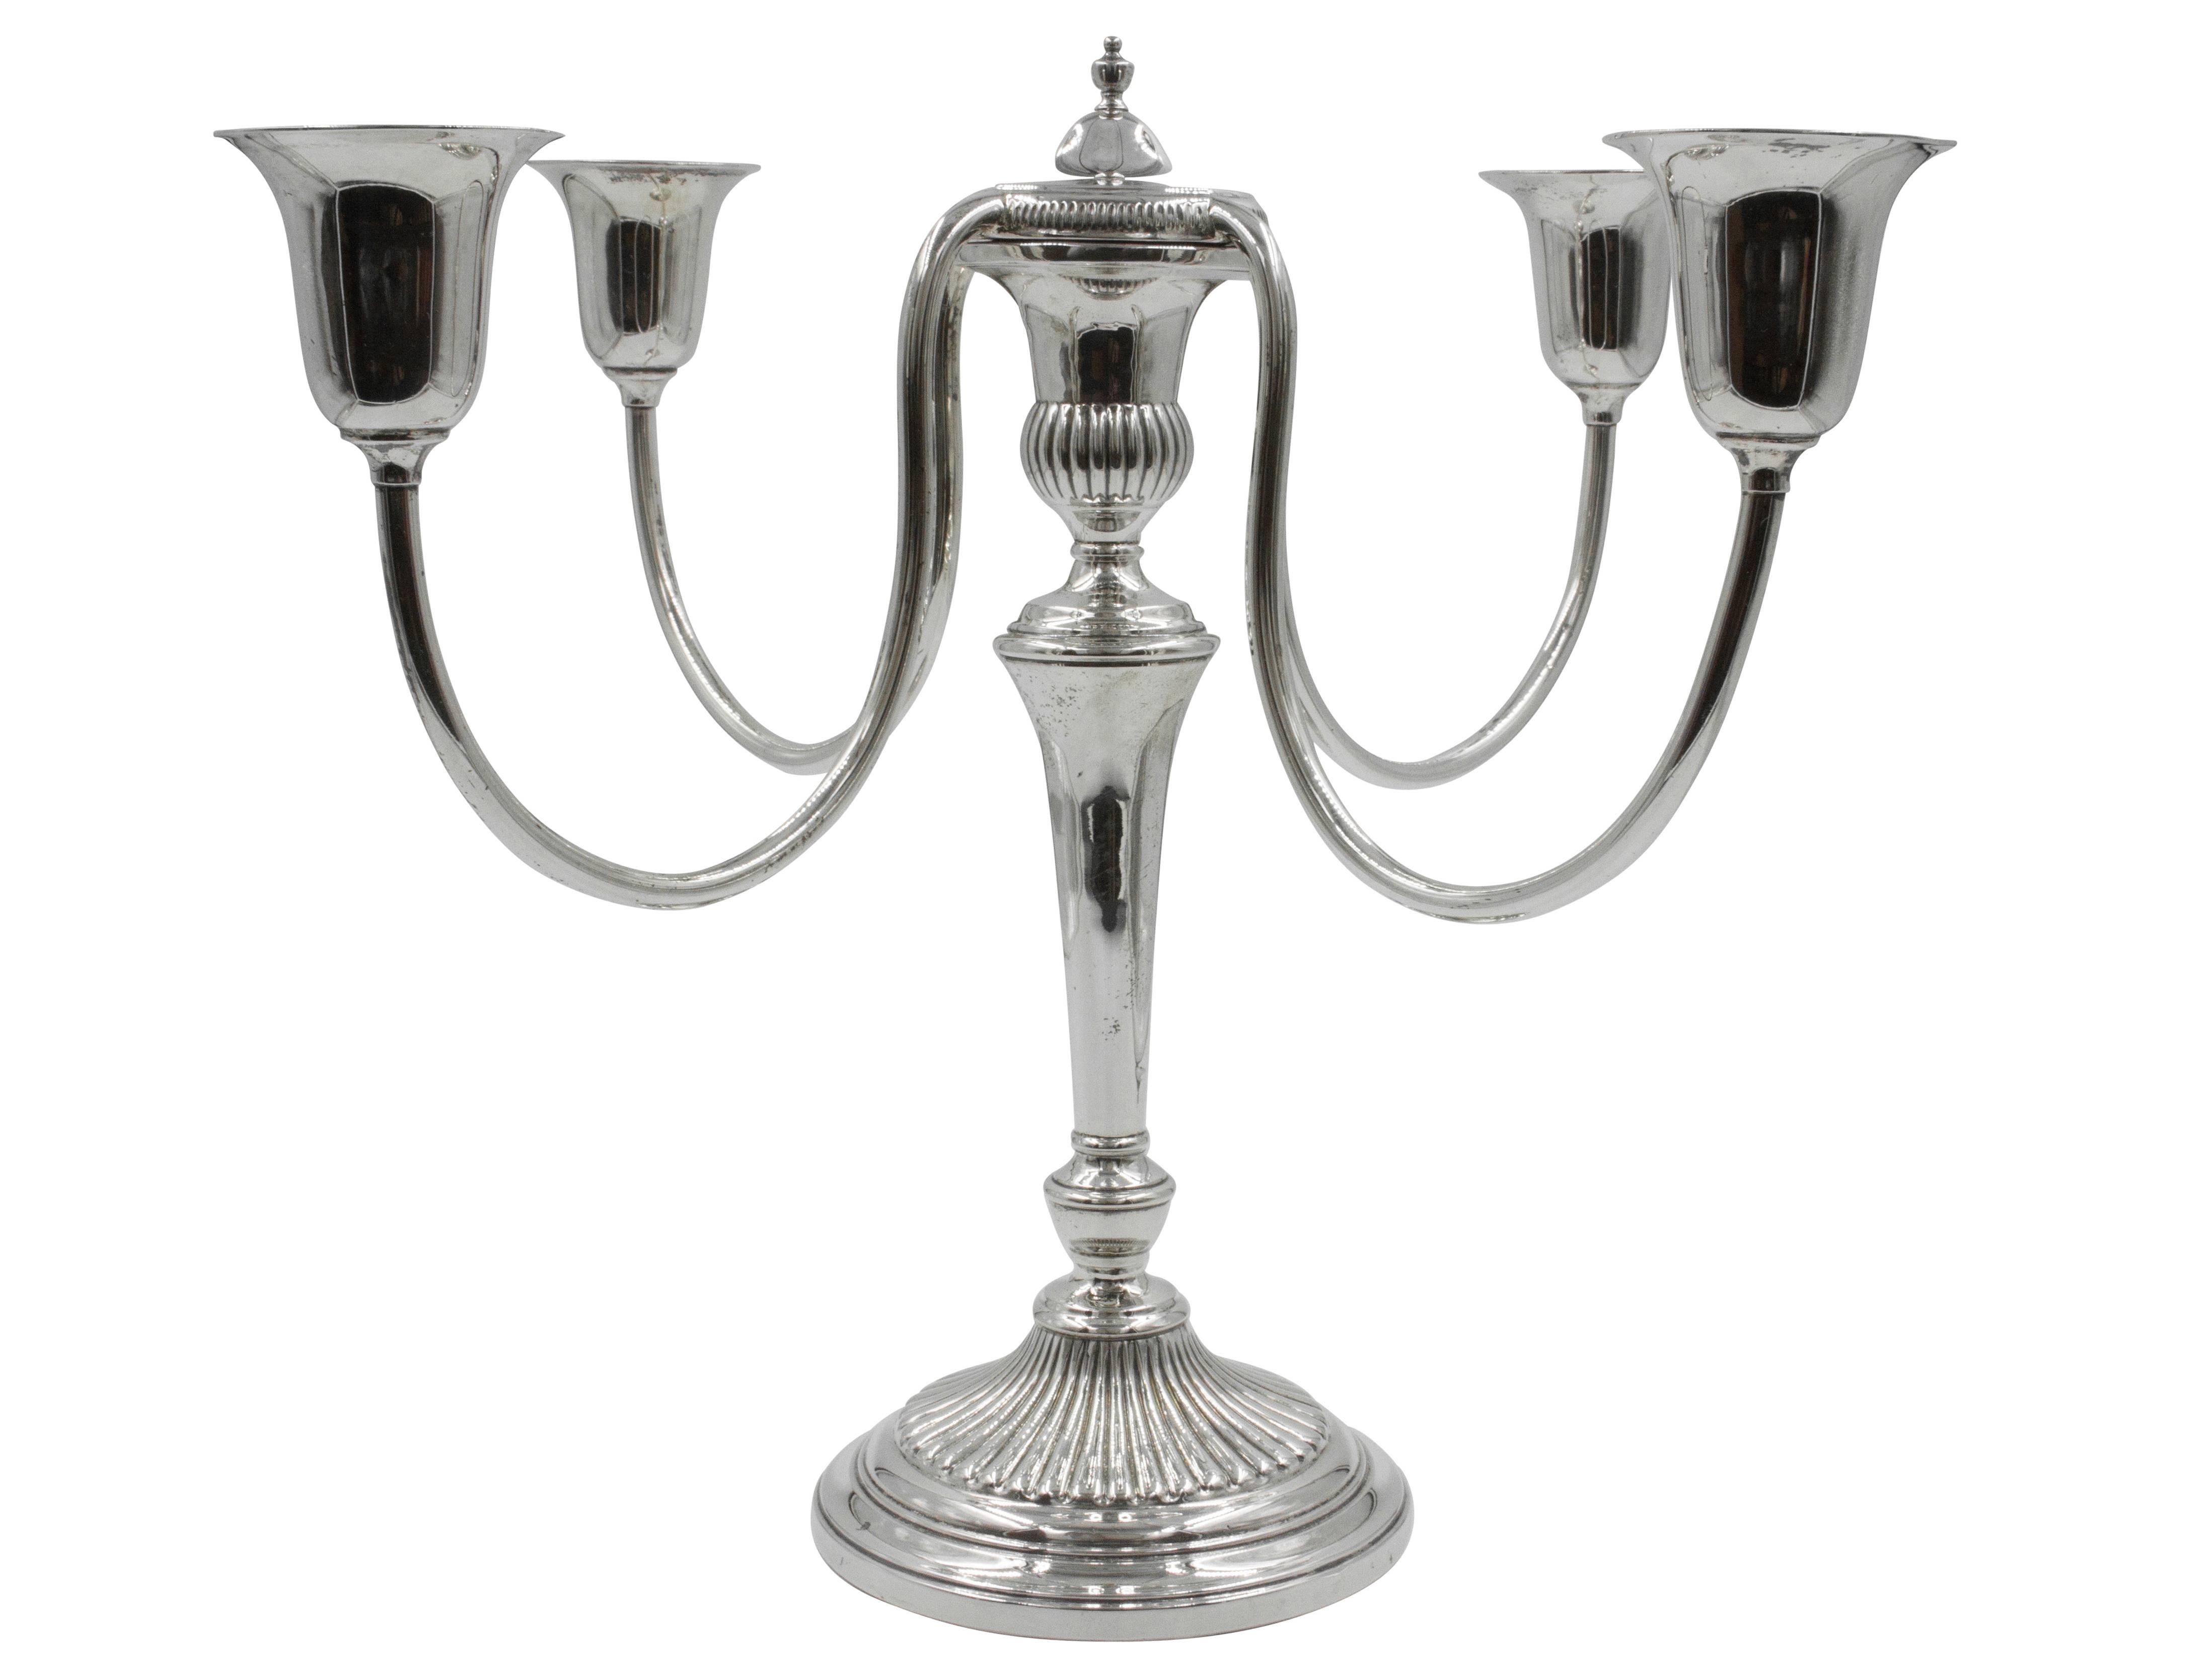 A pair of lovely five branch candelabras that would look great on a server or dining room table. The tops are removable from the body, making them easy to clean and store. Formal in appearance but without the ornate work, these candelabras are